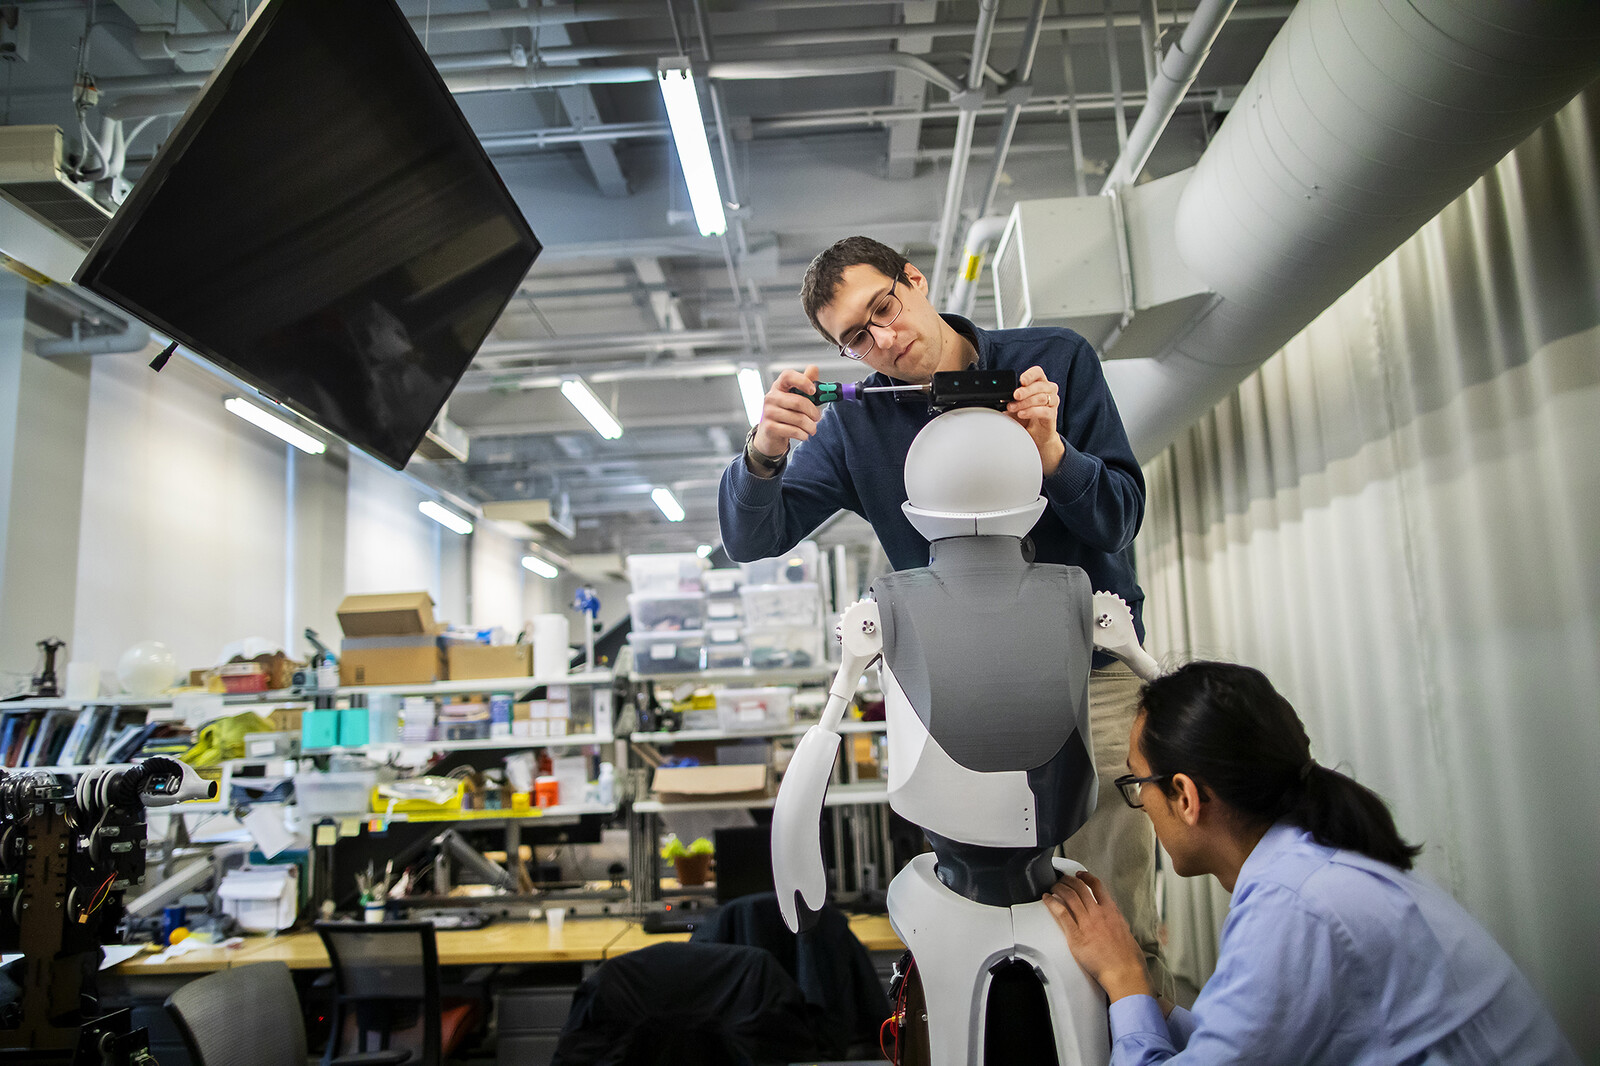 Robot-human interaction research being conducted at the Pennovation Center